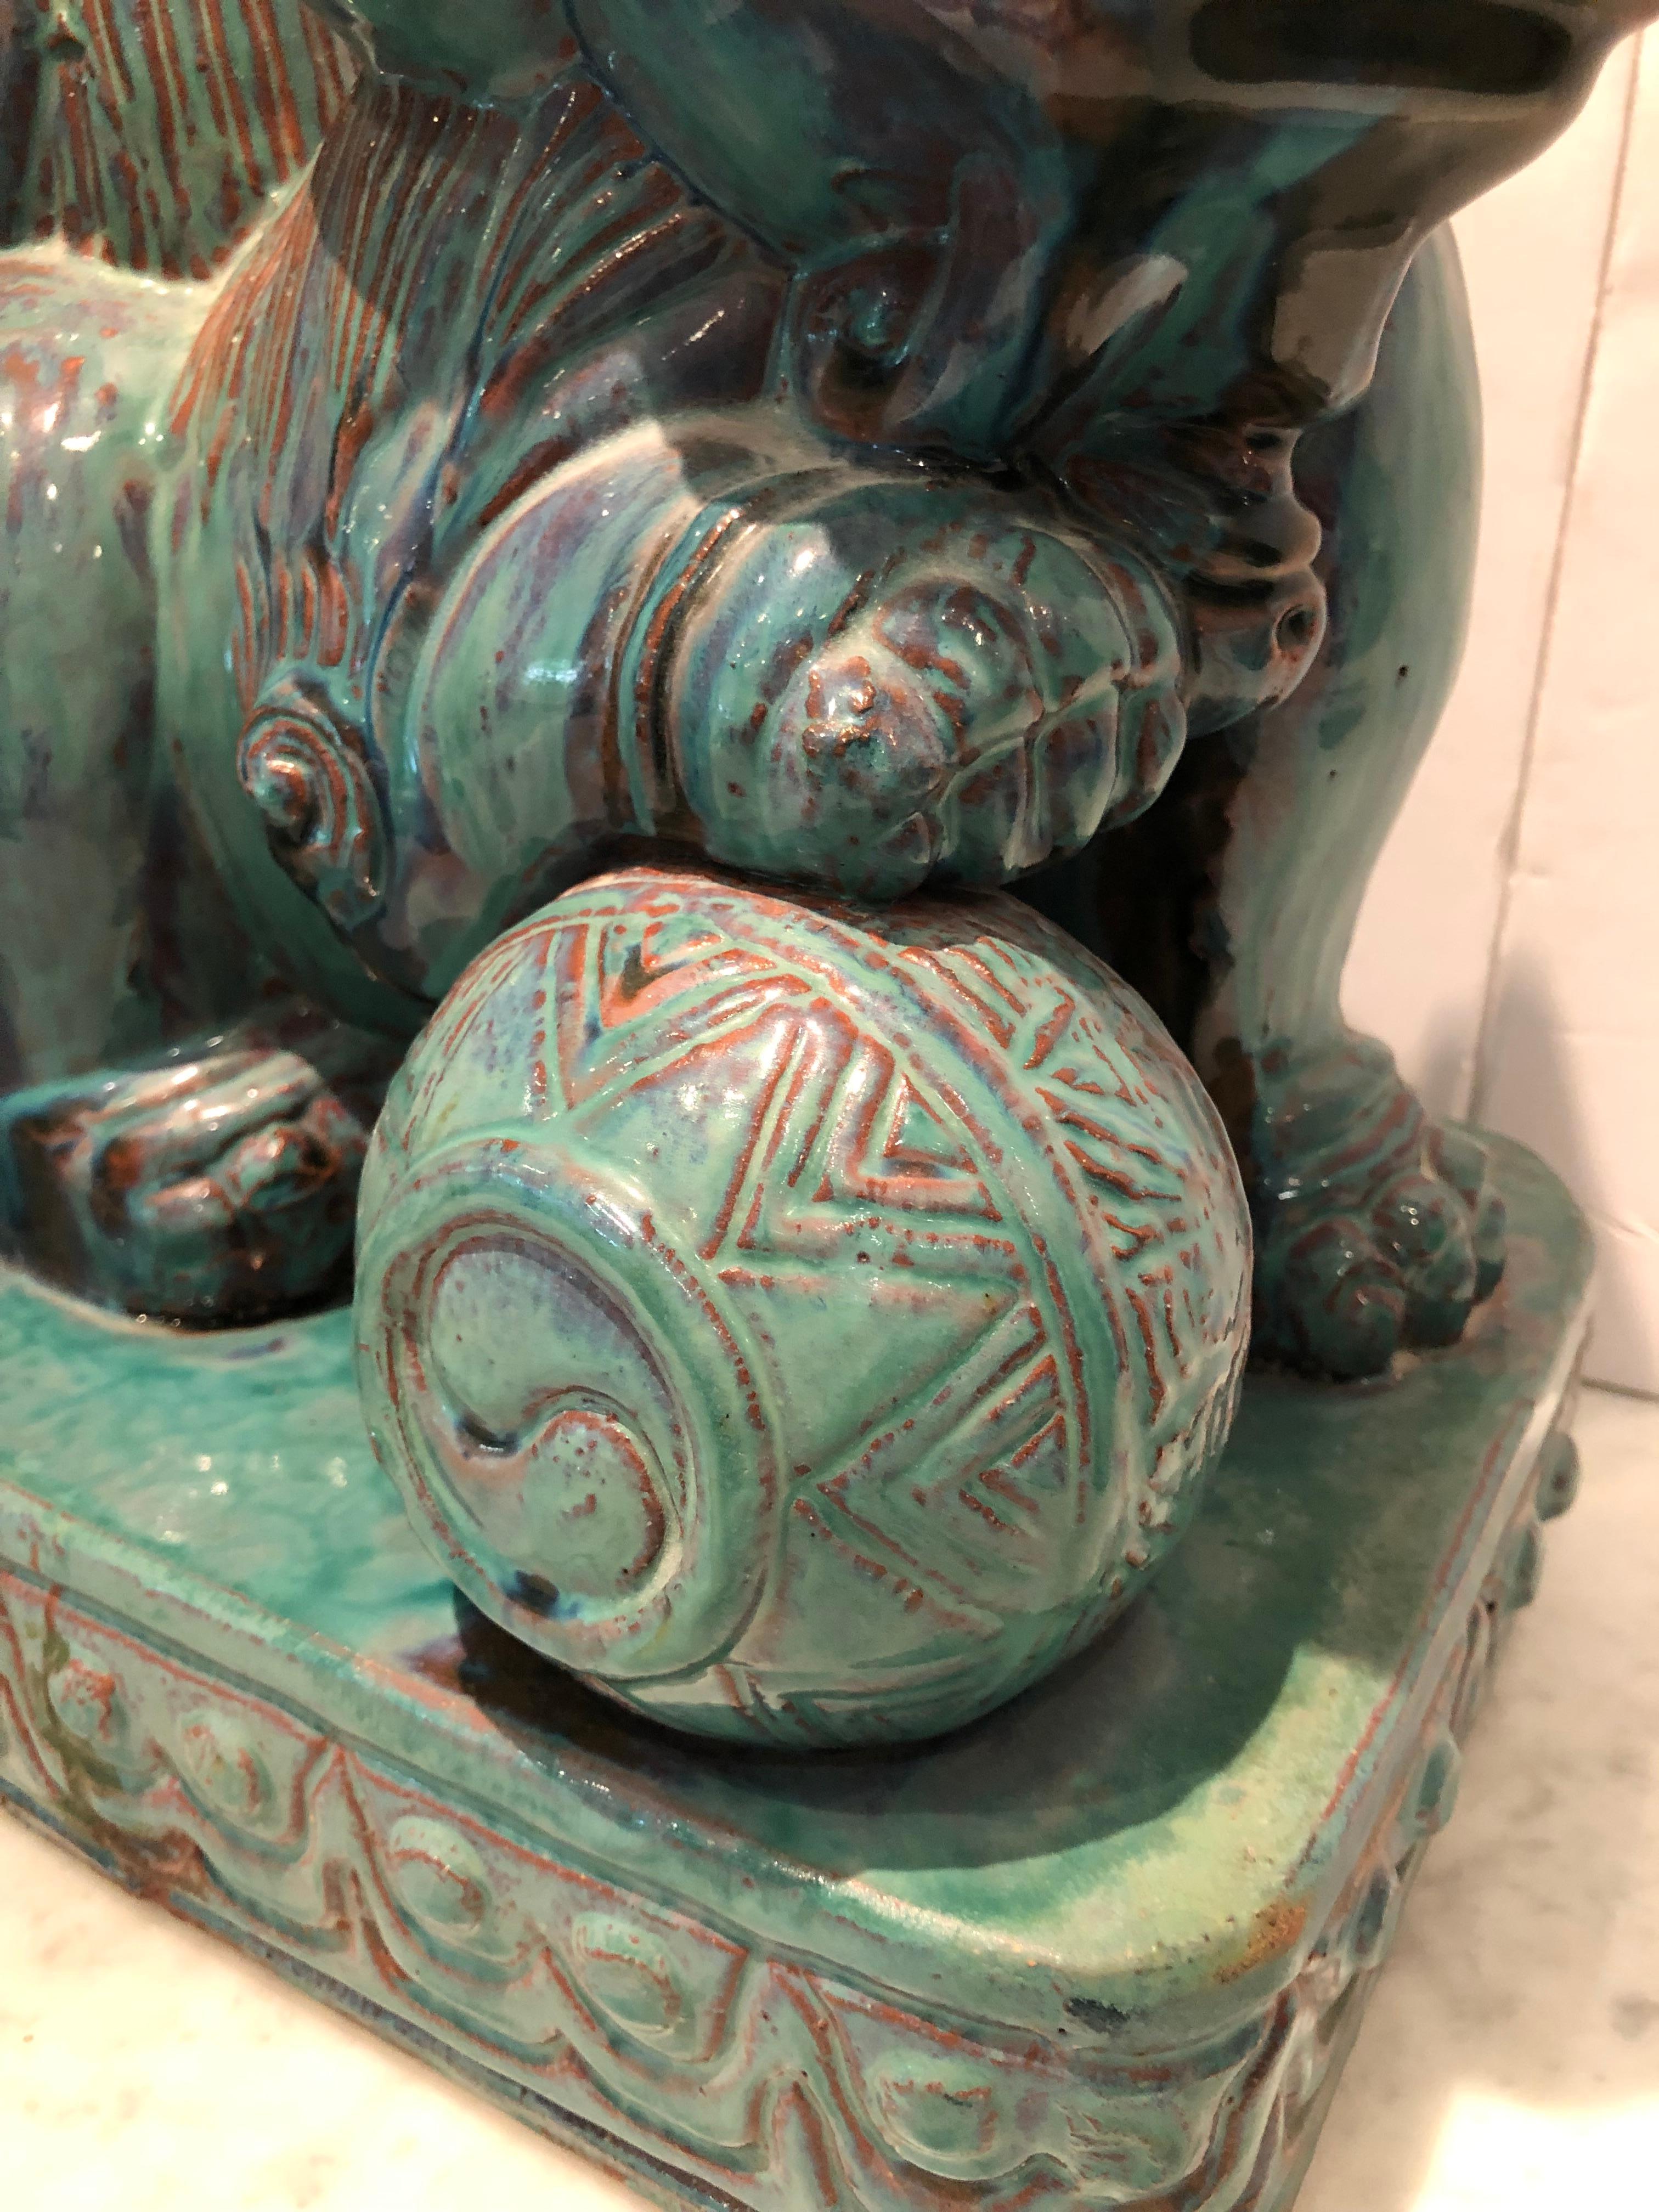 Large pair of Chinese foo dogs in a turquoise glaze. One dog has a ball under its paw, the other a smaller dog. Made of terra cotta, the chunky size of this pair make them quite dramatic. The glaze on the front of the plinth of one dog reads green